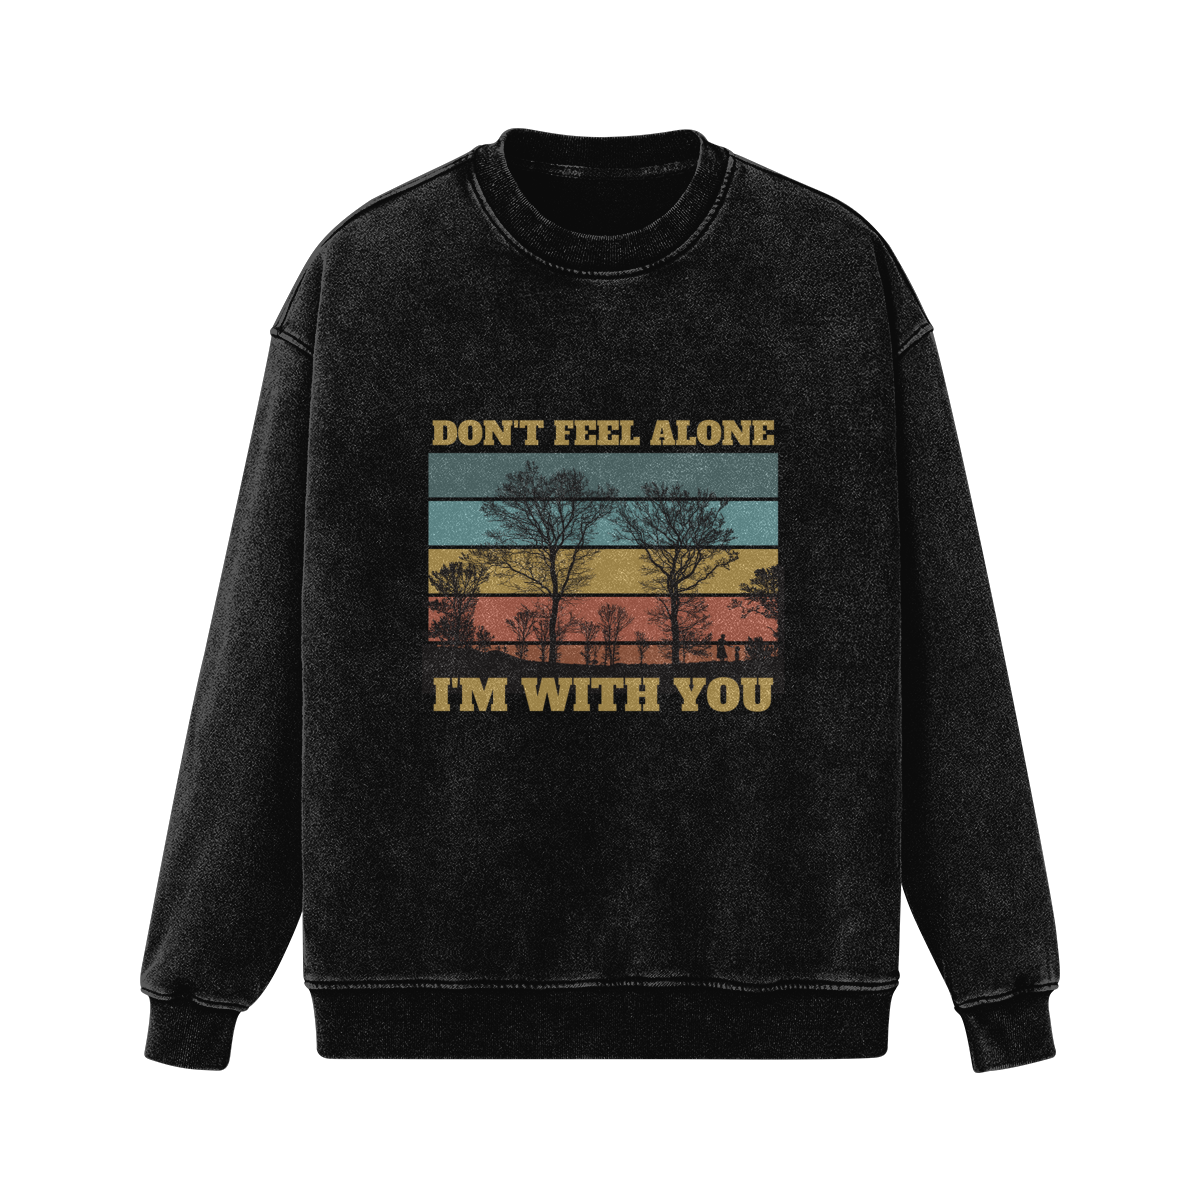 Oversized Fit Sweatshirt with Don't feel alone